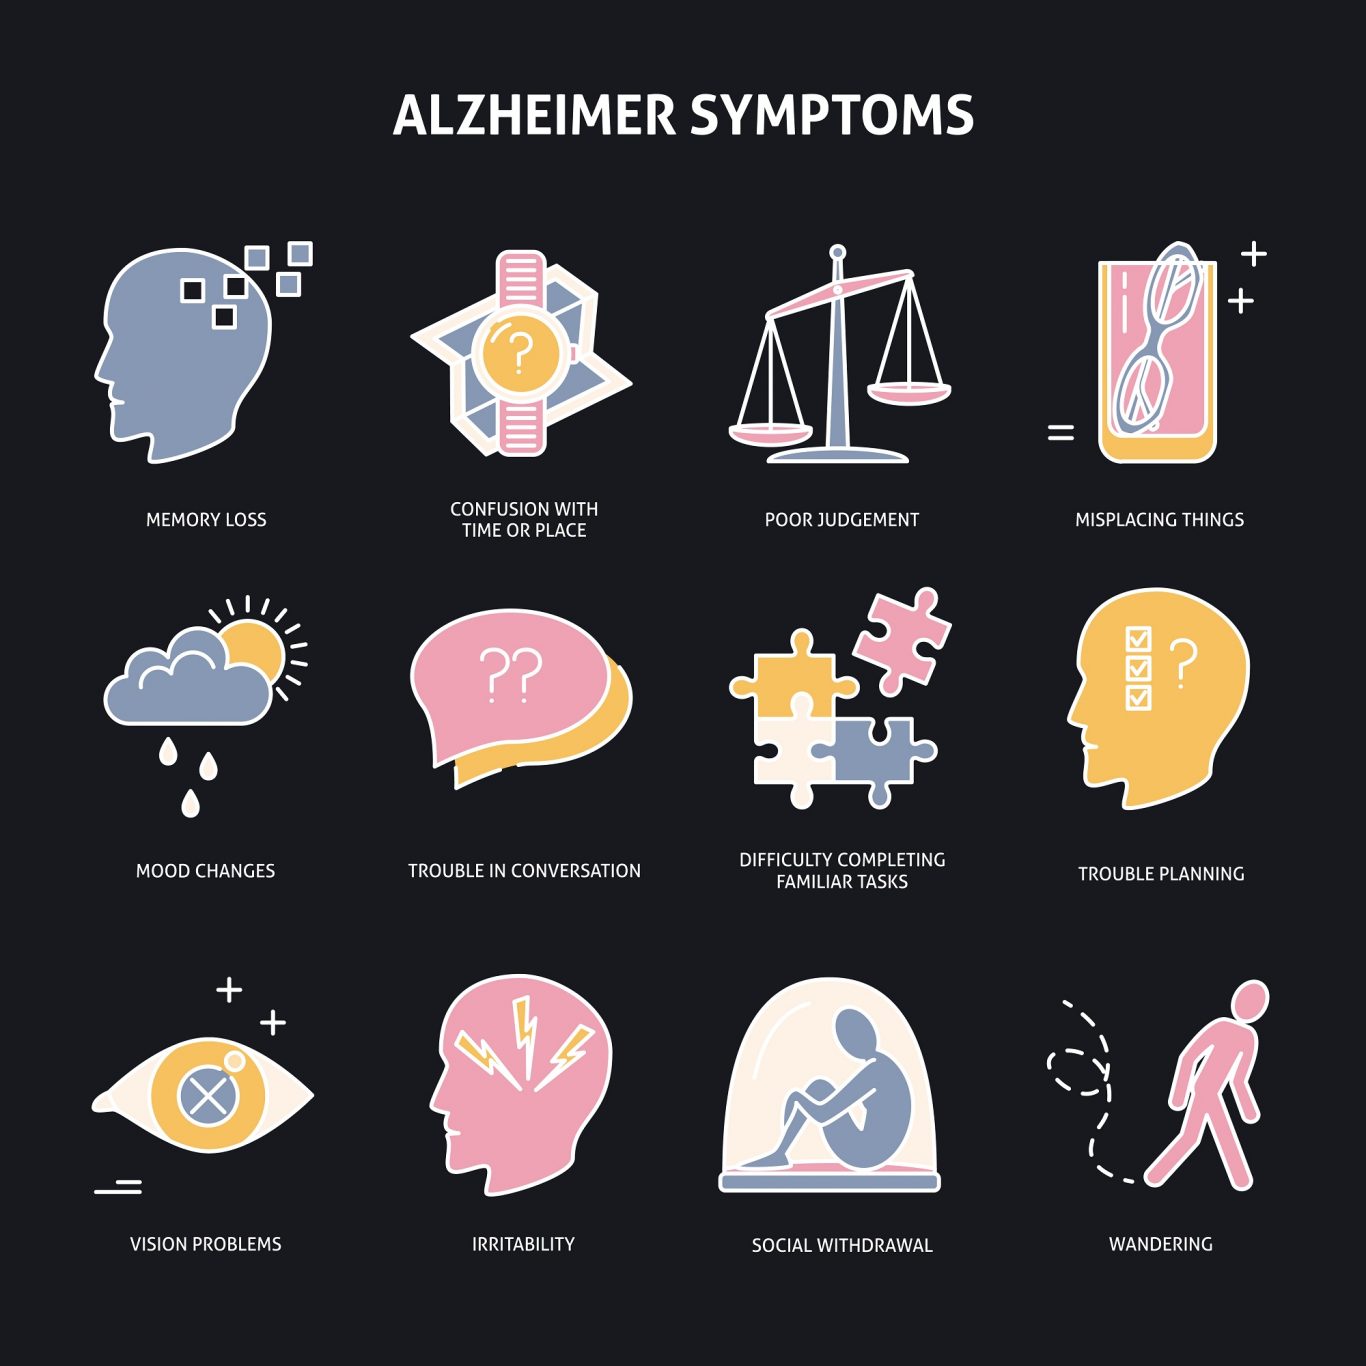 Warning signs of Alzheimer's disease